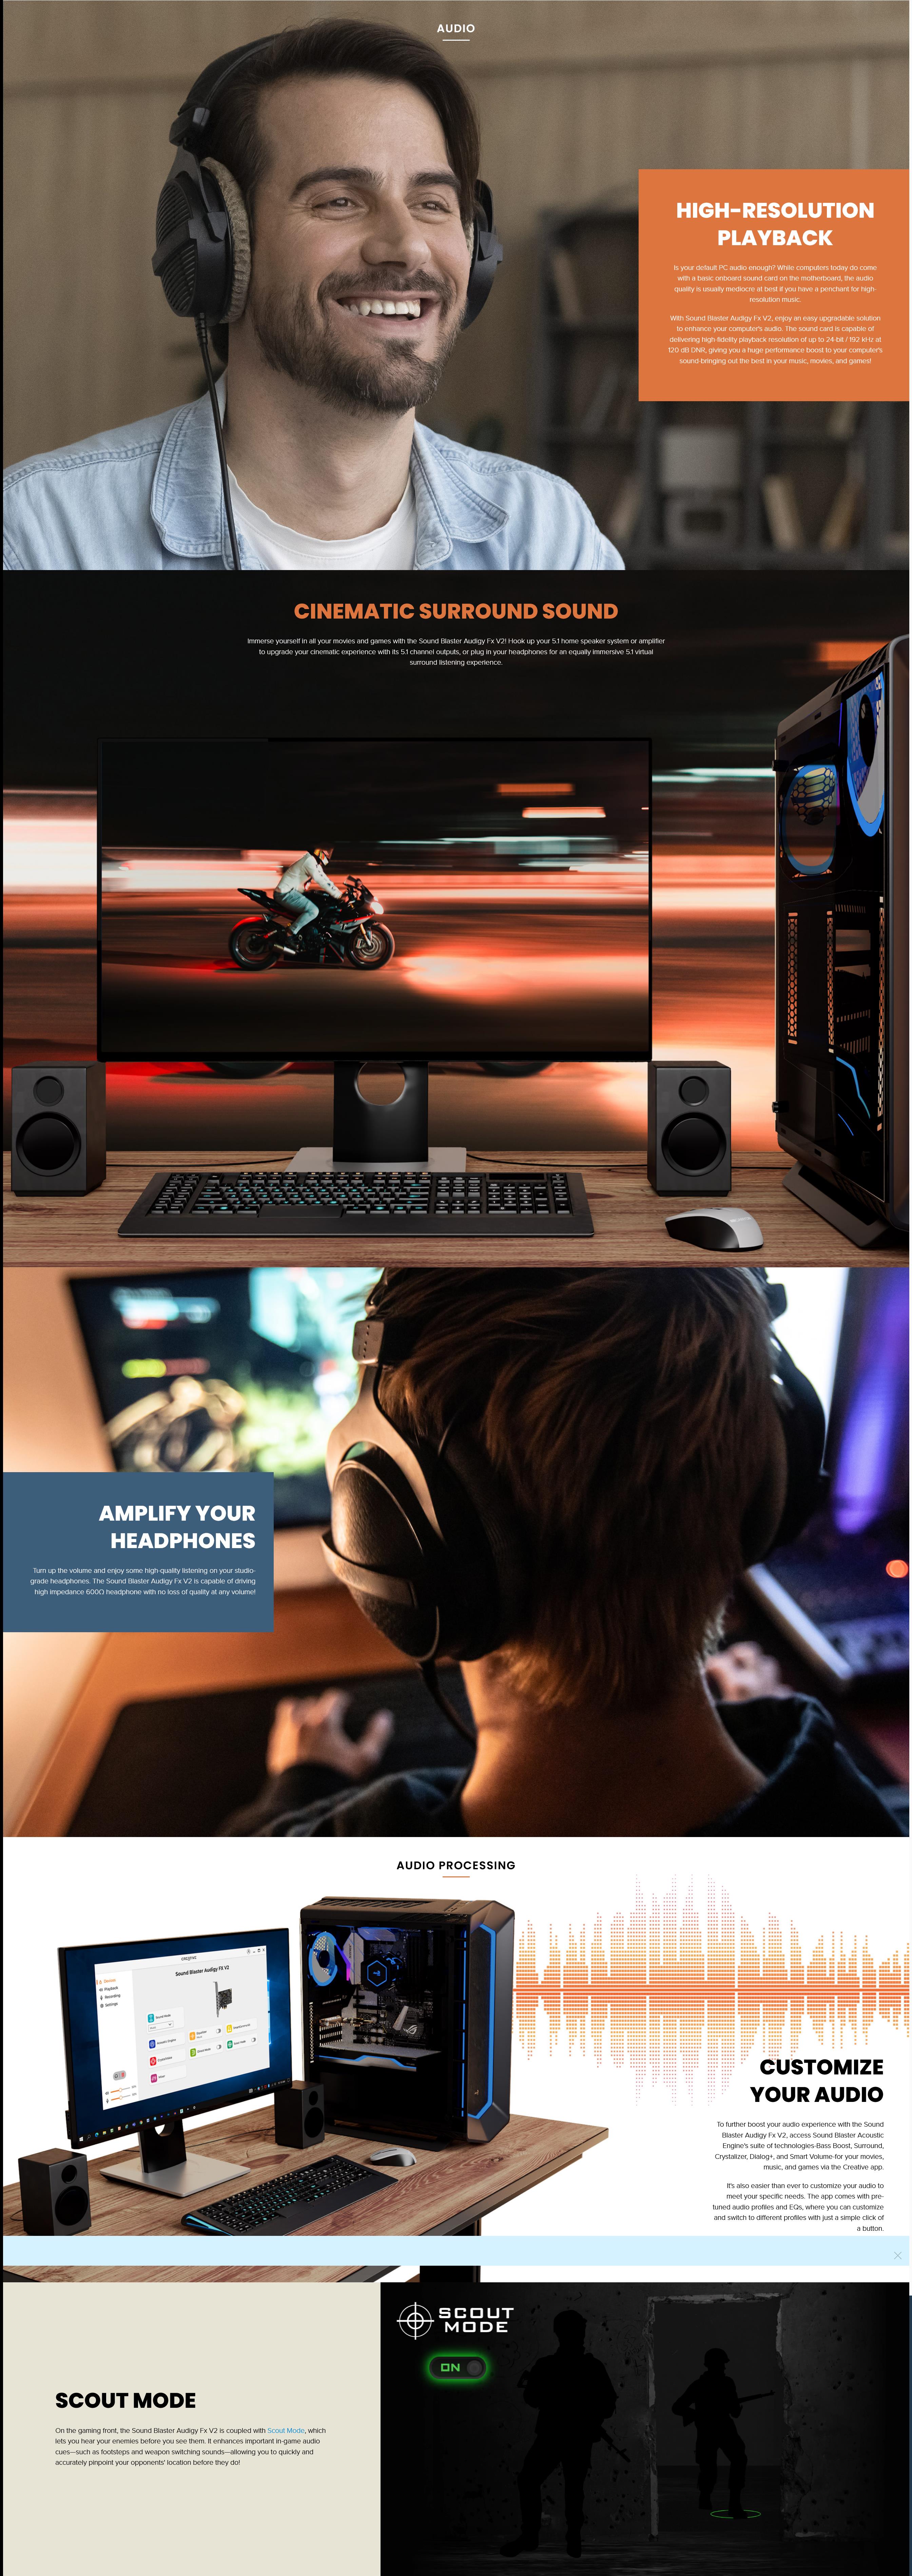 A large marketing image providing additional information about the product Creative Sound Blaster Audigy FX V2 PCI-E Sound Card - Additional alt info not provided